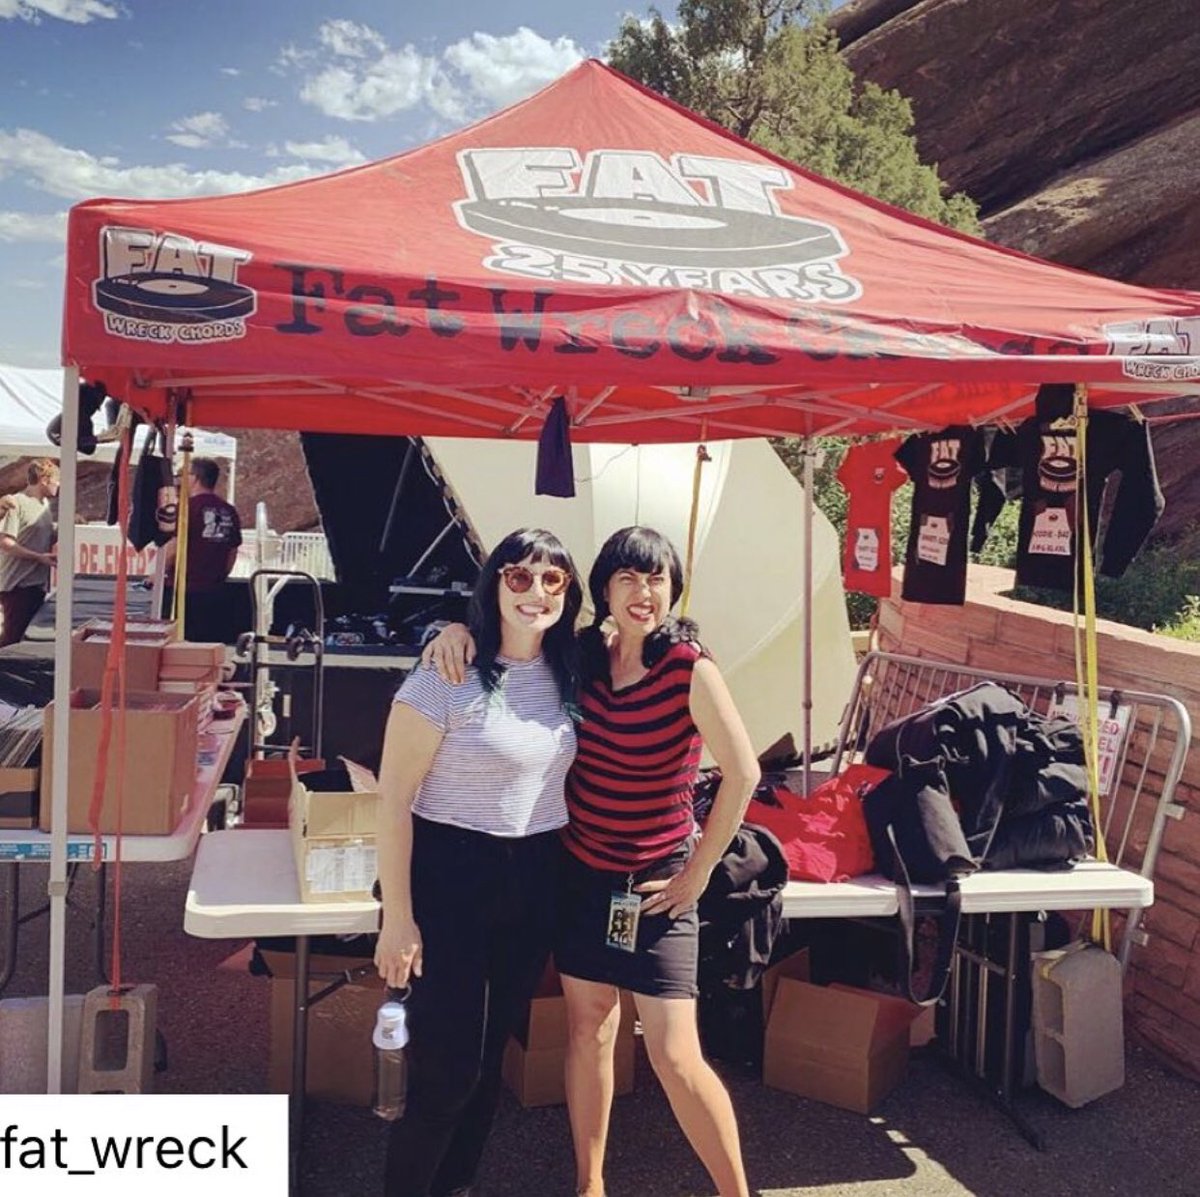 @karinadenike continuing to rock it with @NoFx Repost from @fat_wreck Jennie from @badcopbadcop and Karina from @nofx hanging with us during @punkindrublicfestival Sunday in Colorado! #fatwreckchords #punkindrublicfest #nofx #badcopbadcop